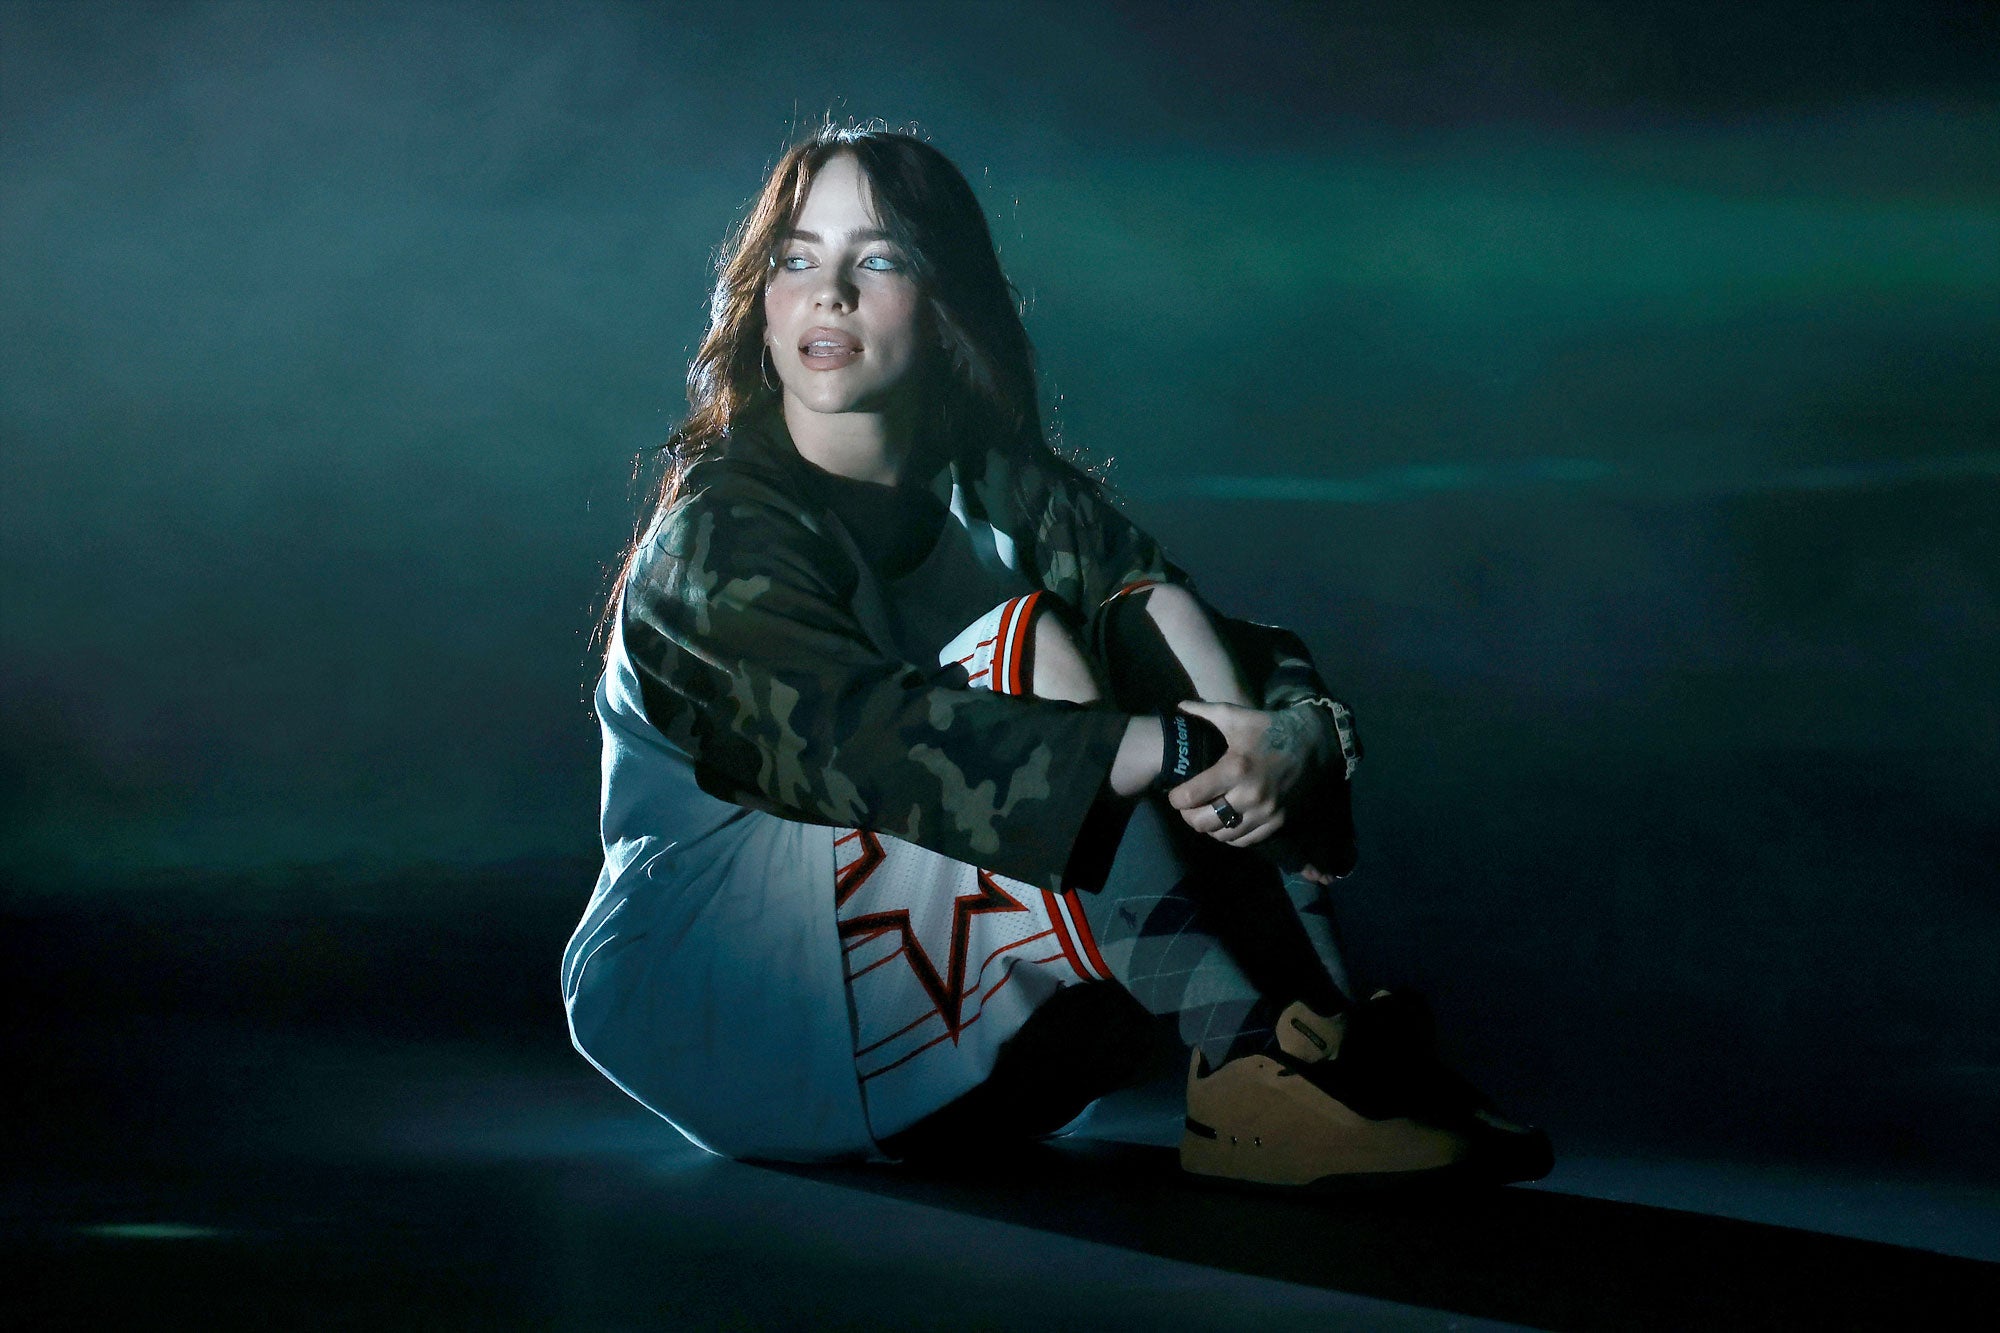 Billie Eilish’s New Album Is a Landmark, Whether She Wants It to Be or Not Carl Wilson